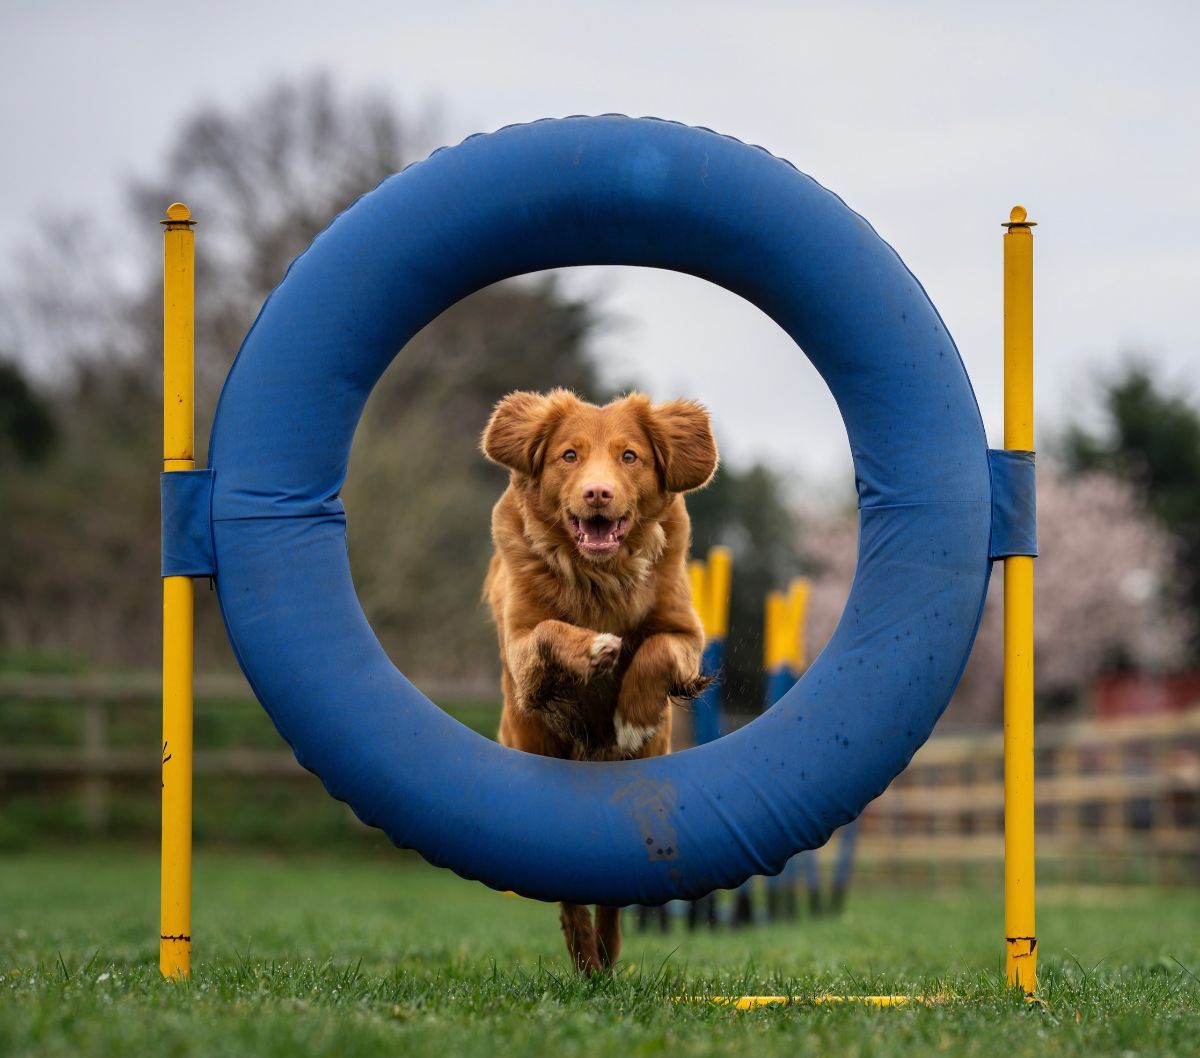 7 Sports That Are Perfect for Training Pet Dogs